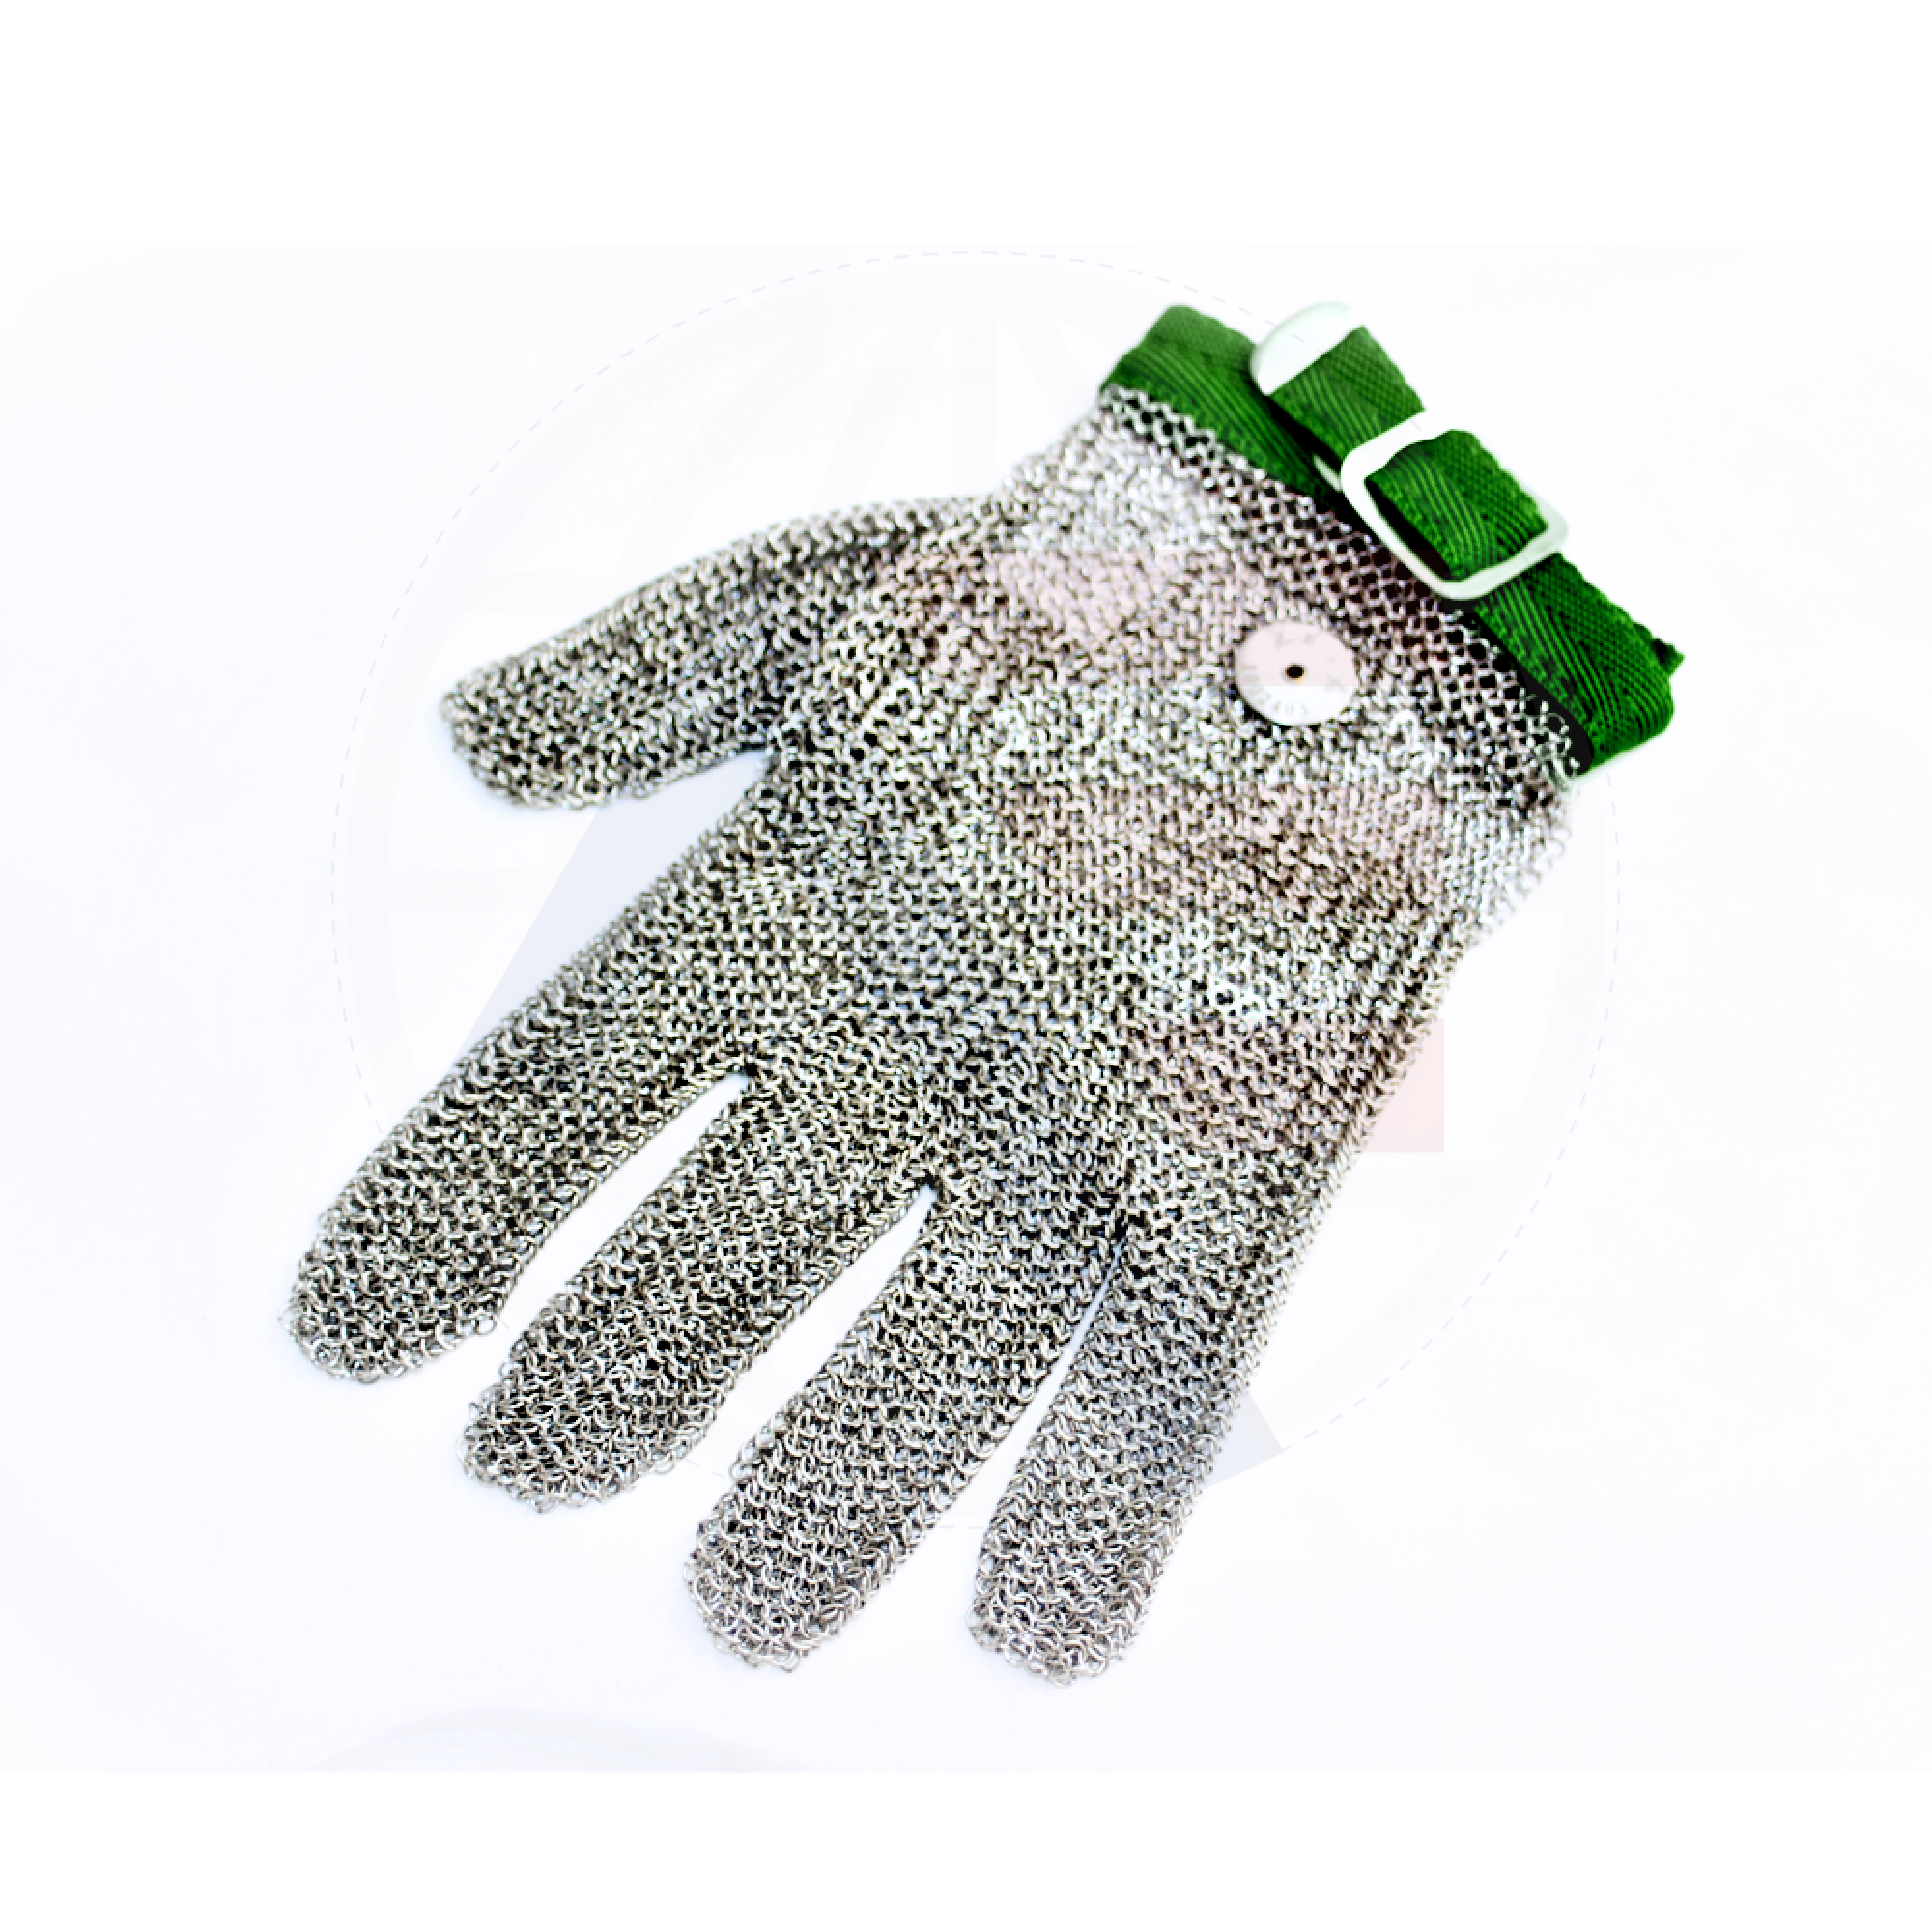 Chainmailglove Protective Safety Glove Xs